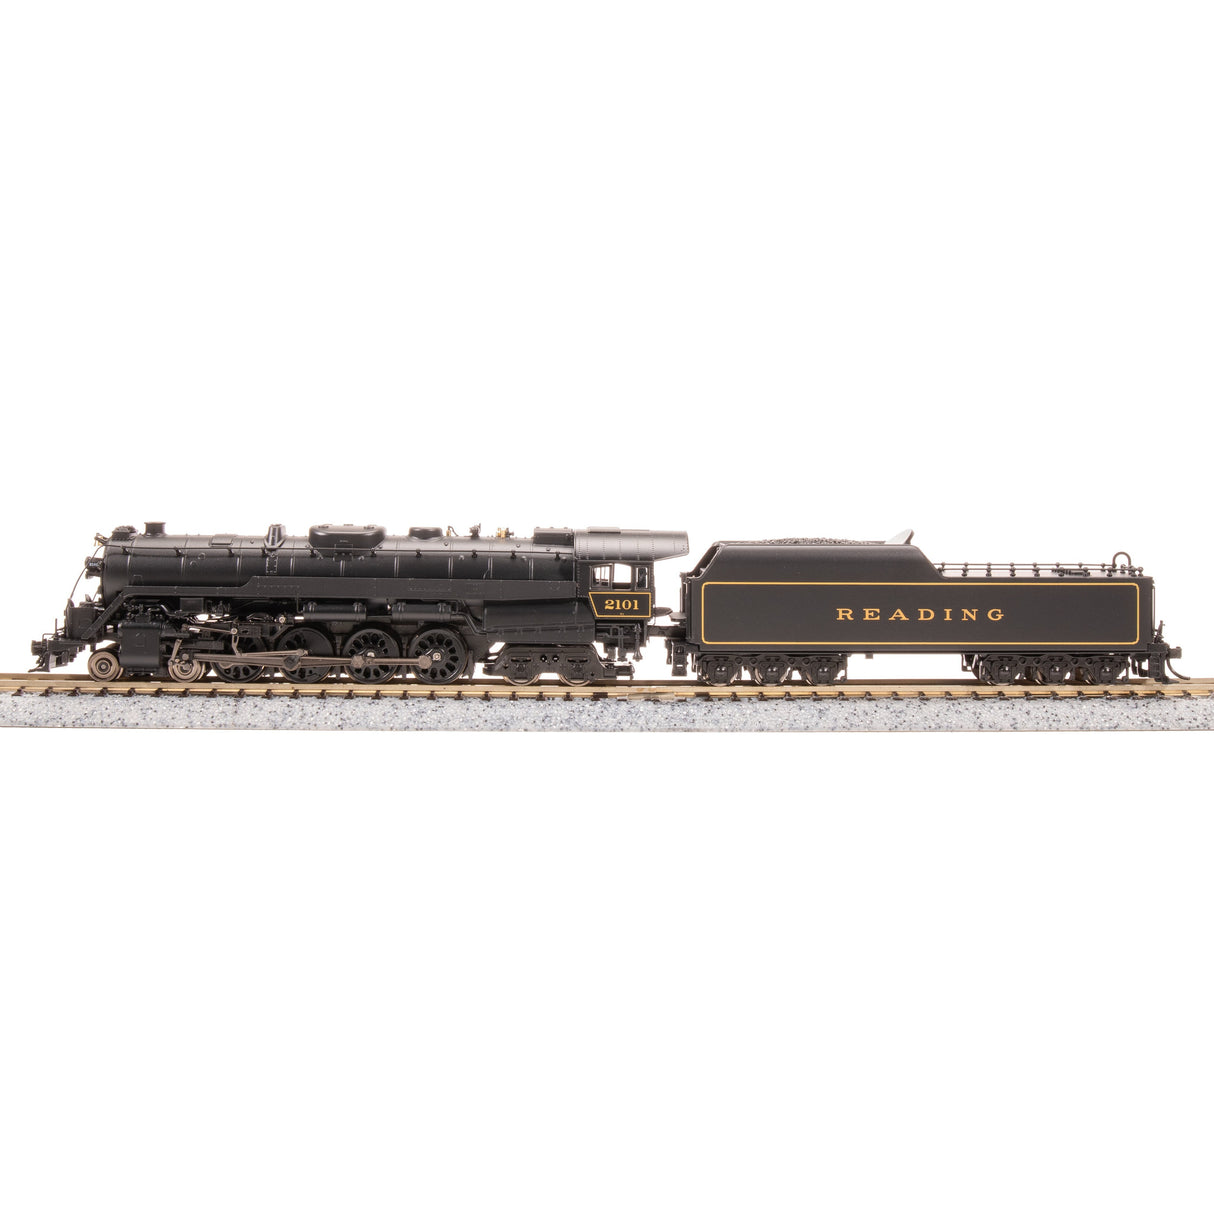 Broadway Limited N Scale Reading T-1 4-8-4 Steam Locomotive #2108/In-Service DC/DCC Sound